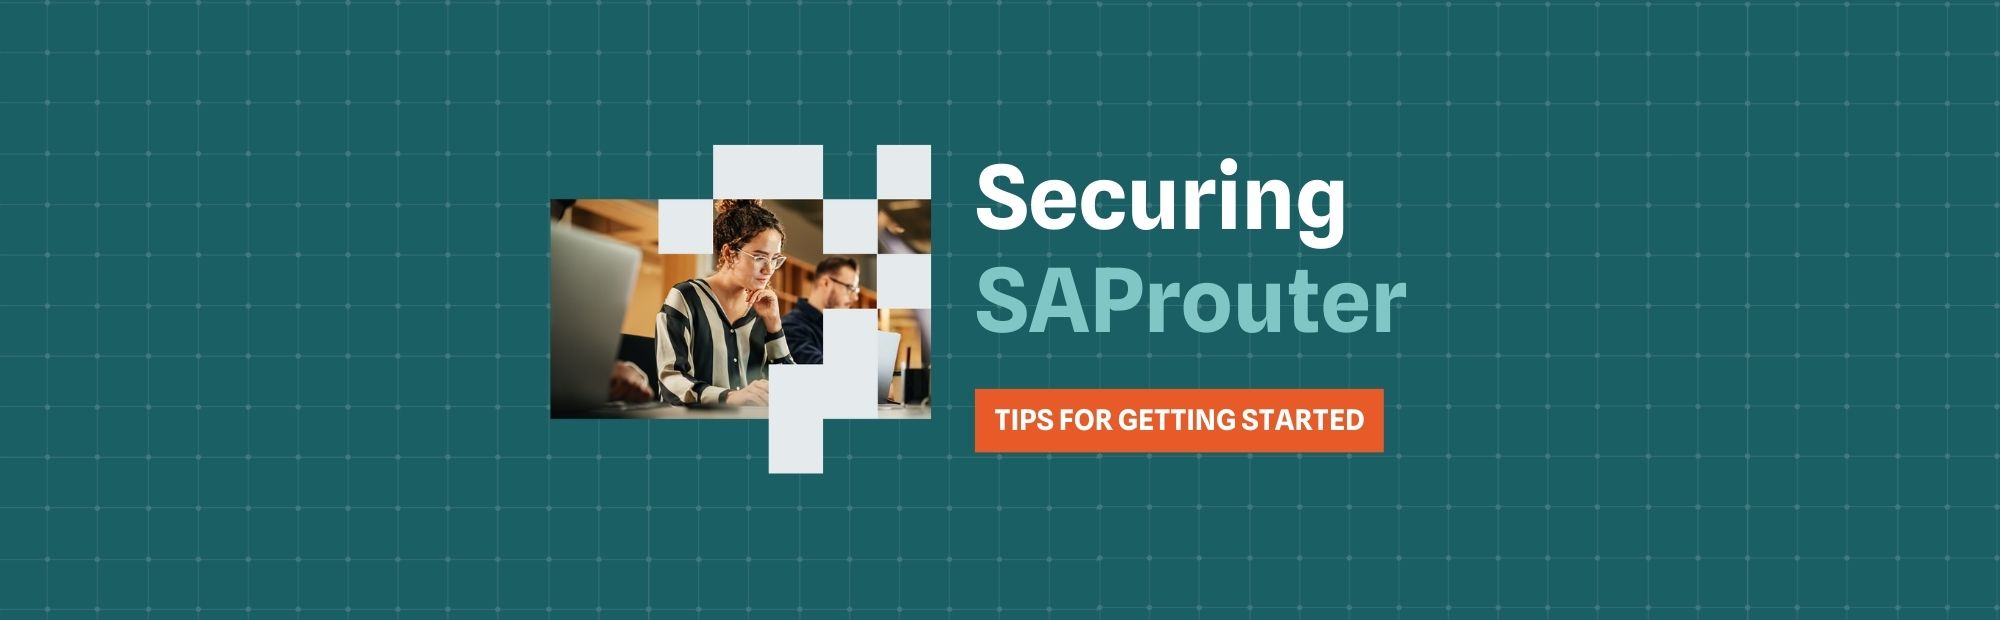 Securing SAProuter